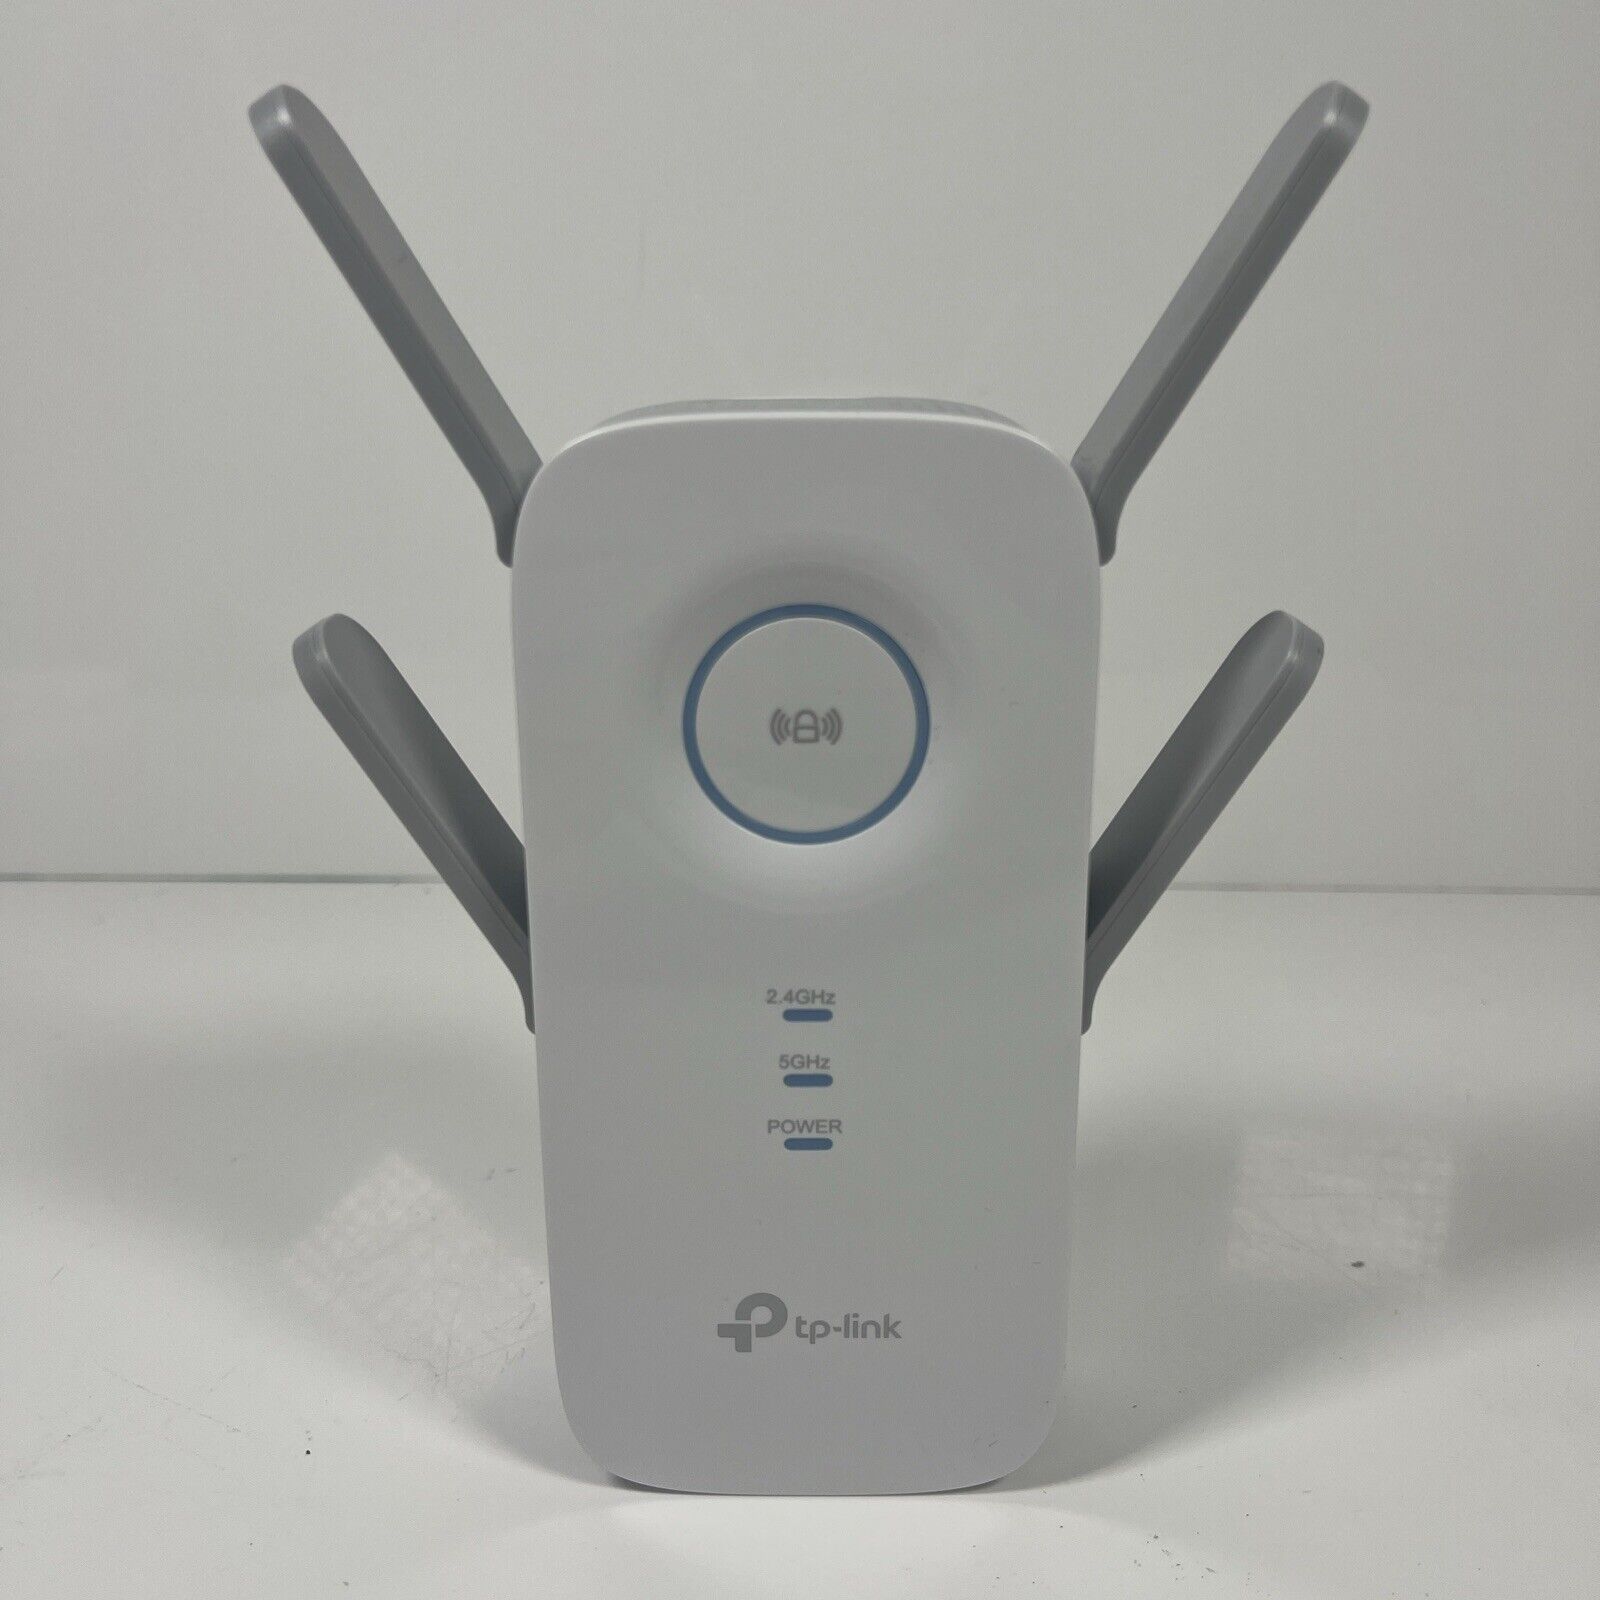 TP-Link RE650 AC2600 Wireless Dual Band MU-MIMO Wi-Fi Range Extender Tested